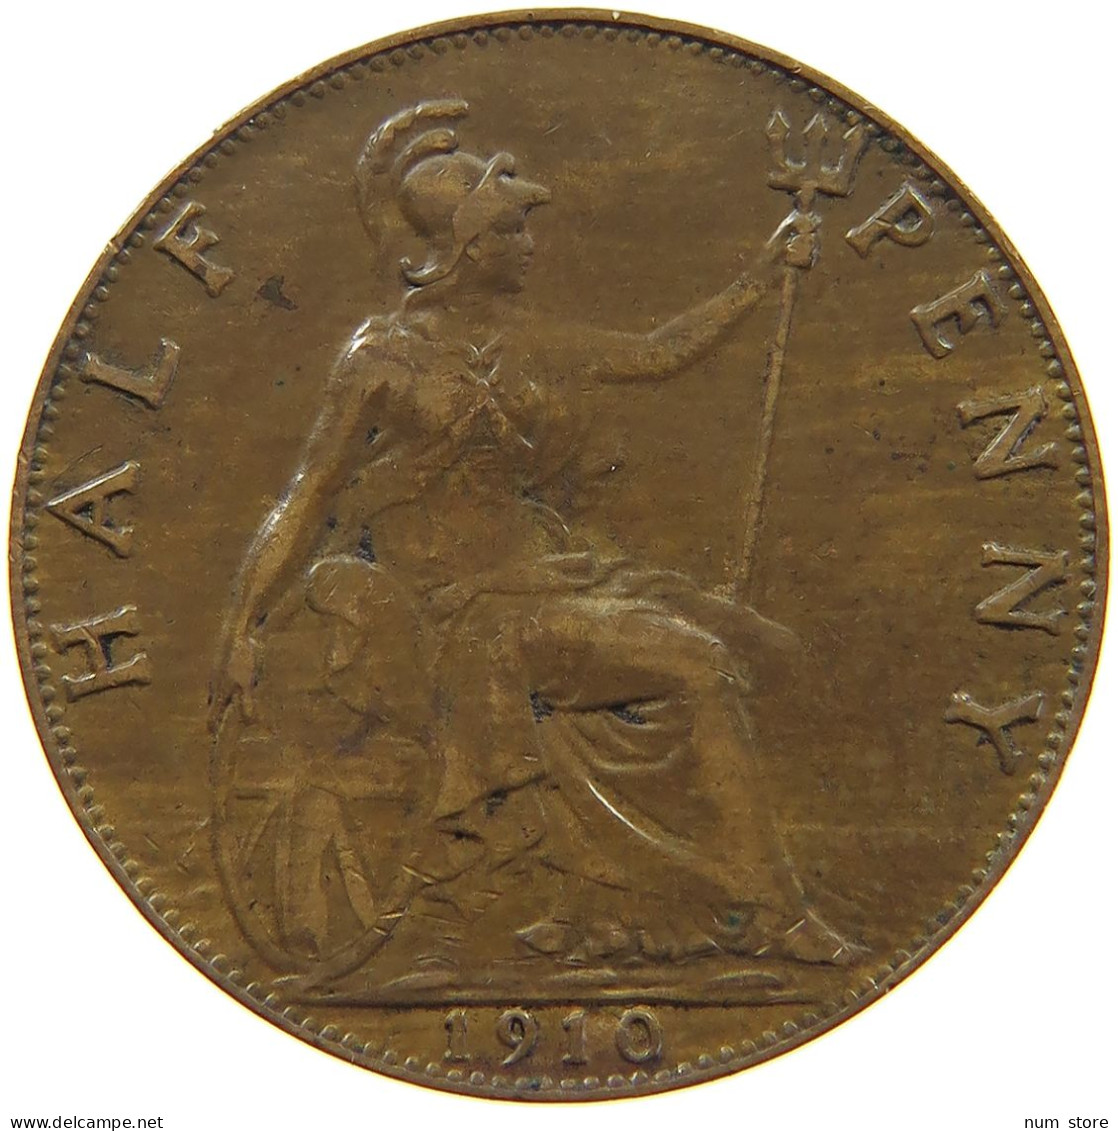 GREAT BRITAIN HALFPENNY 1910 George V. (1910-1936) #c061 0035 - C. 1/2 Penny